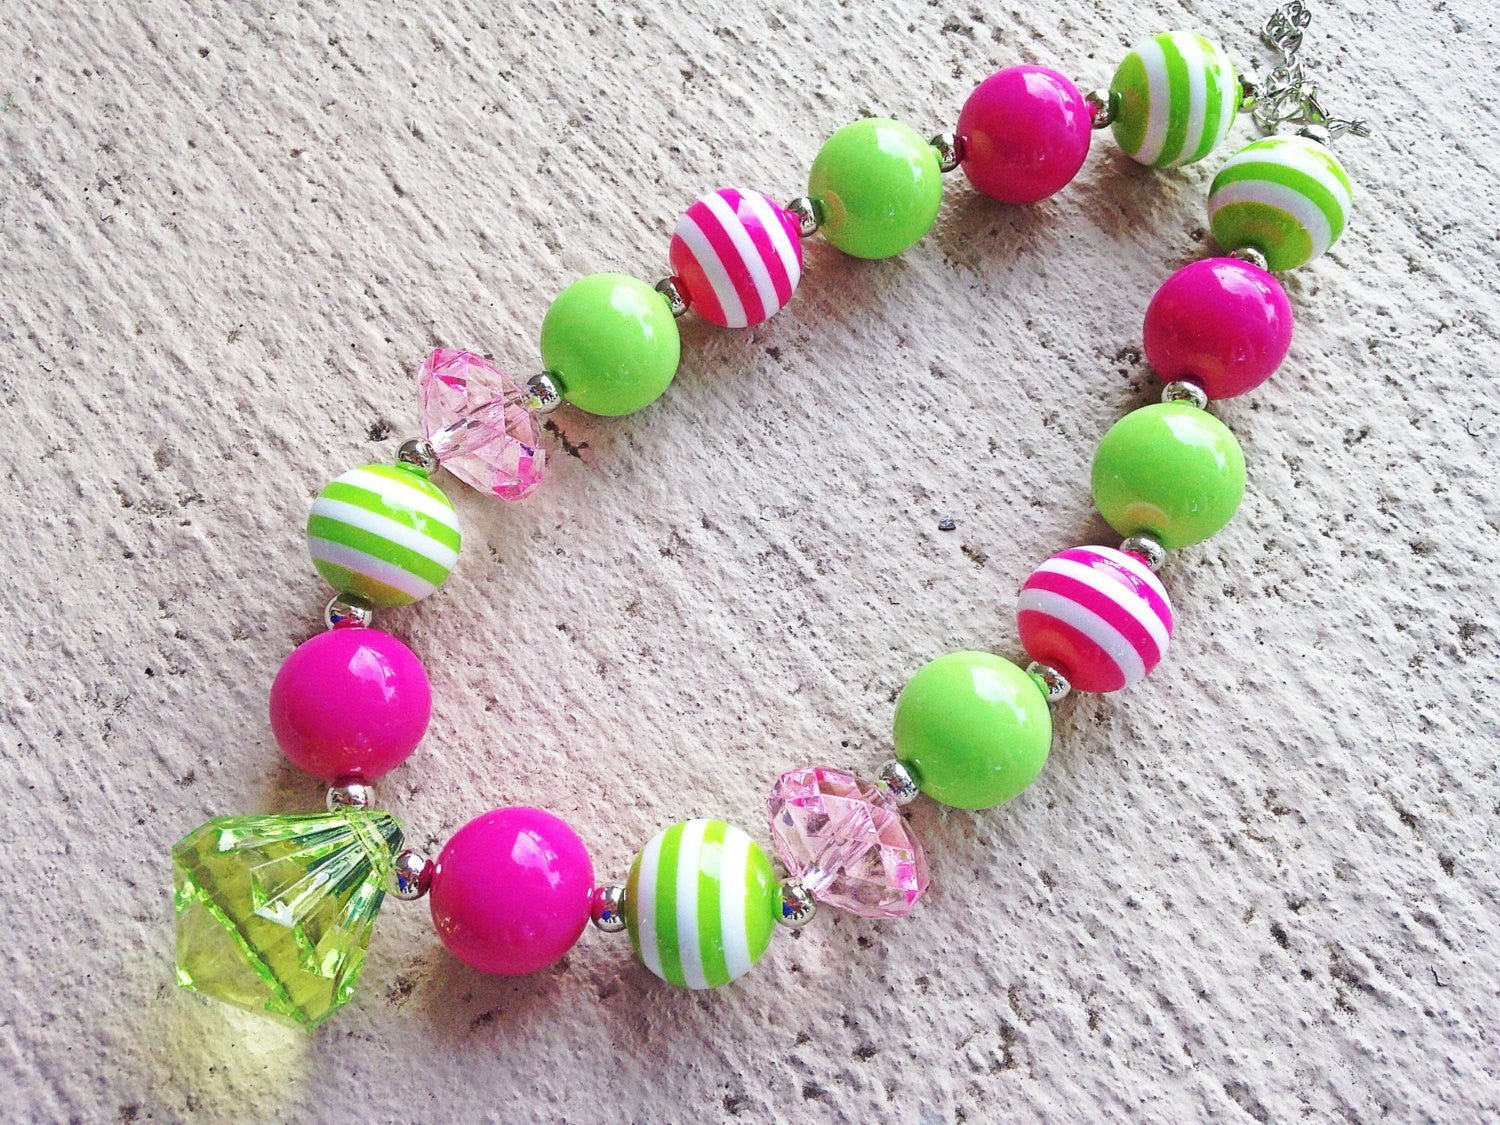 CLEARANCE Neon Throwback Statement Necklace - Squishy Cheeks